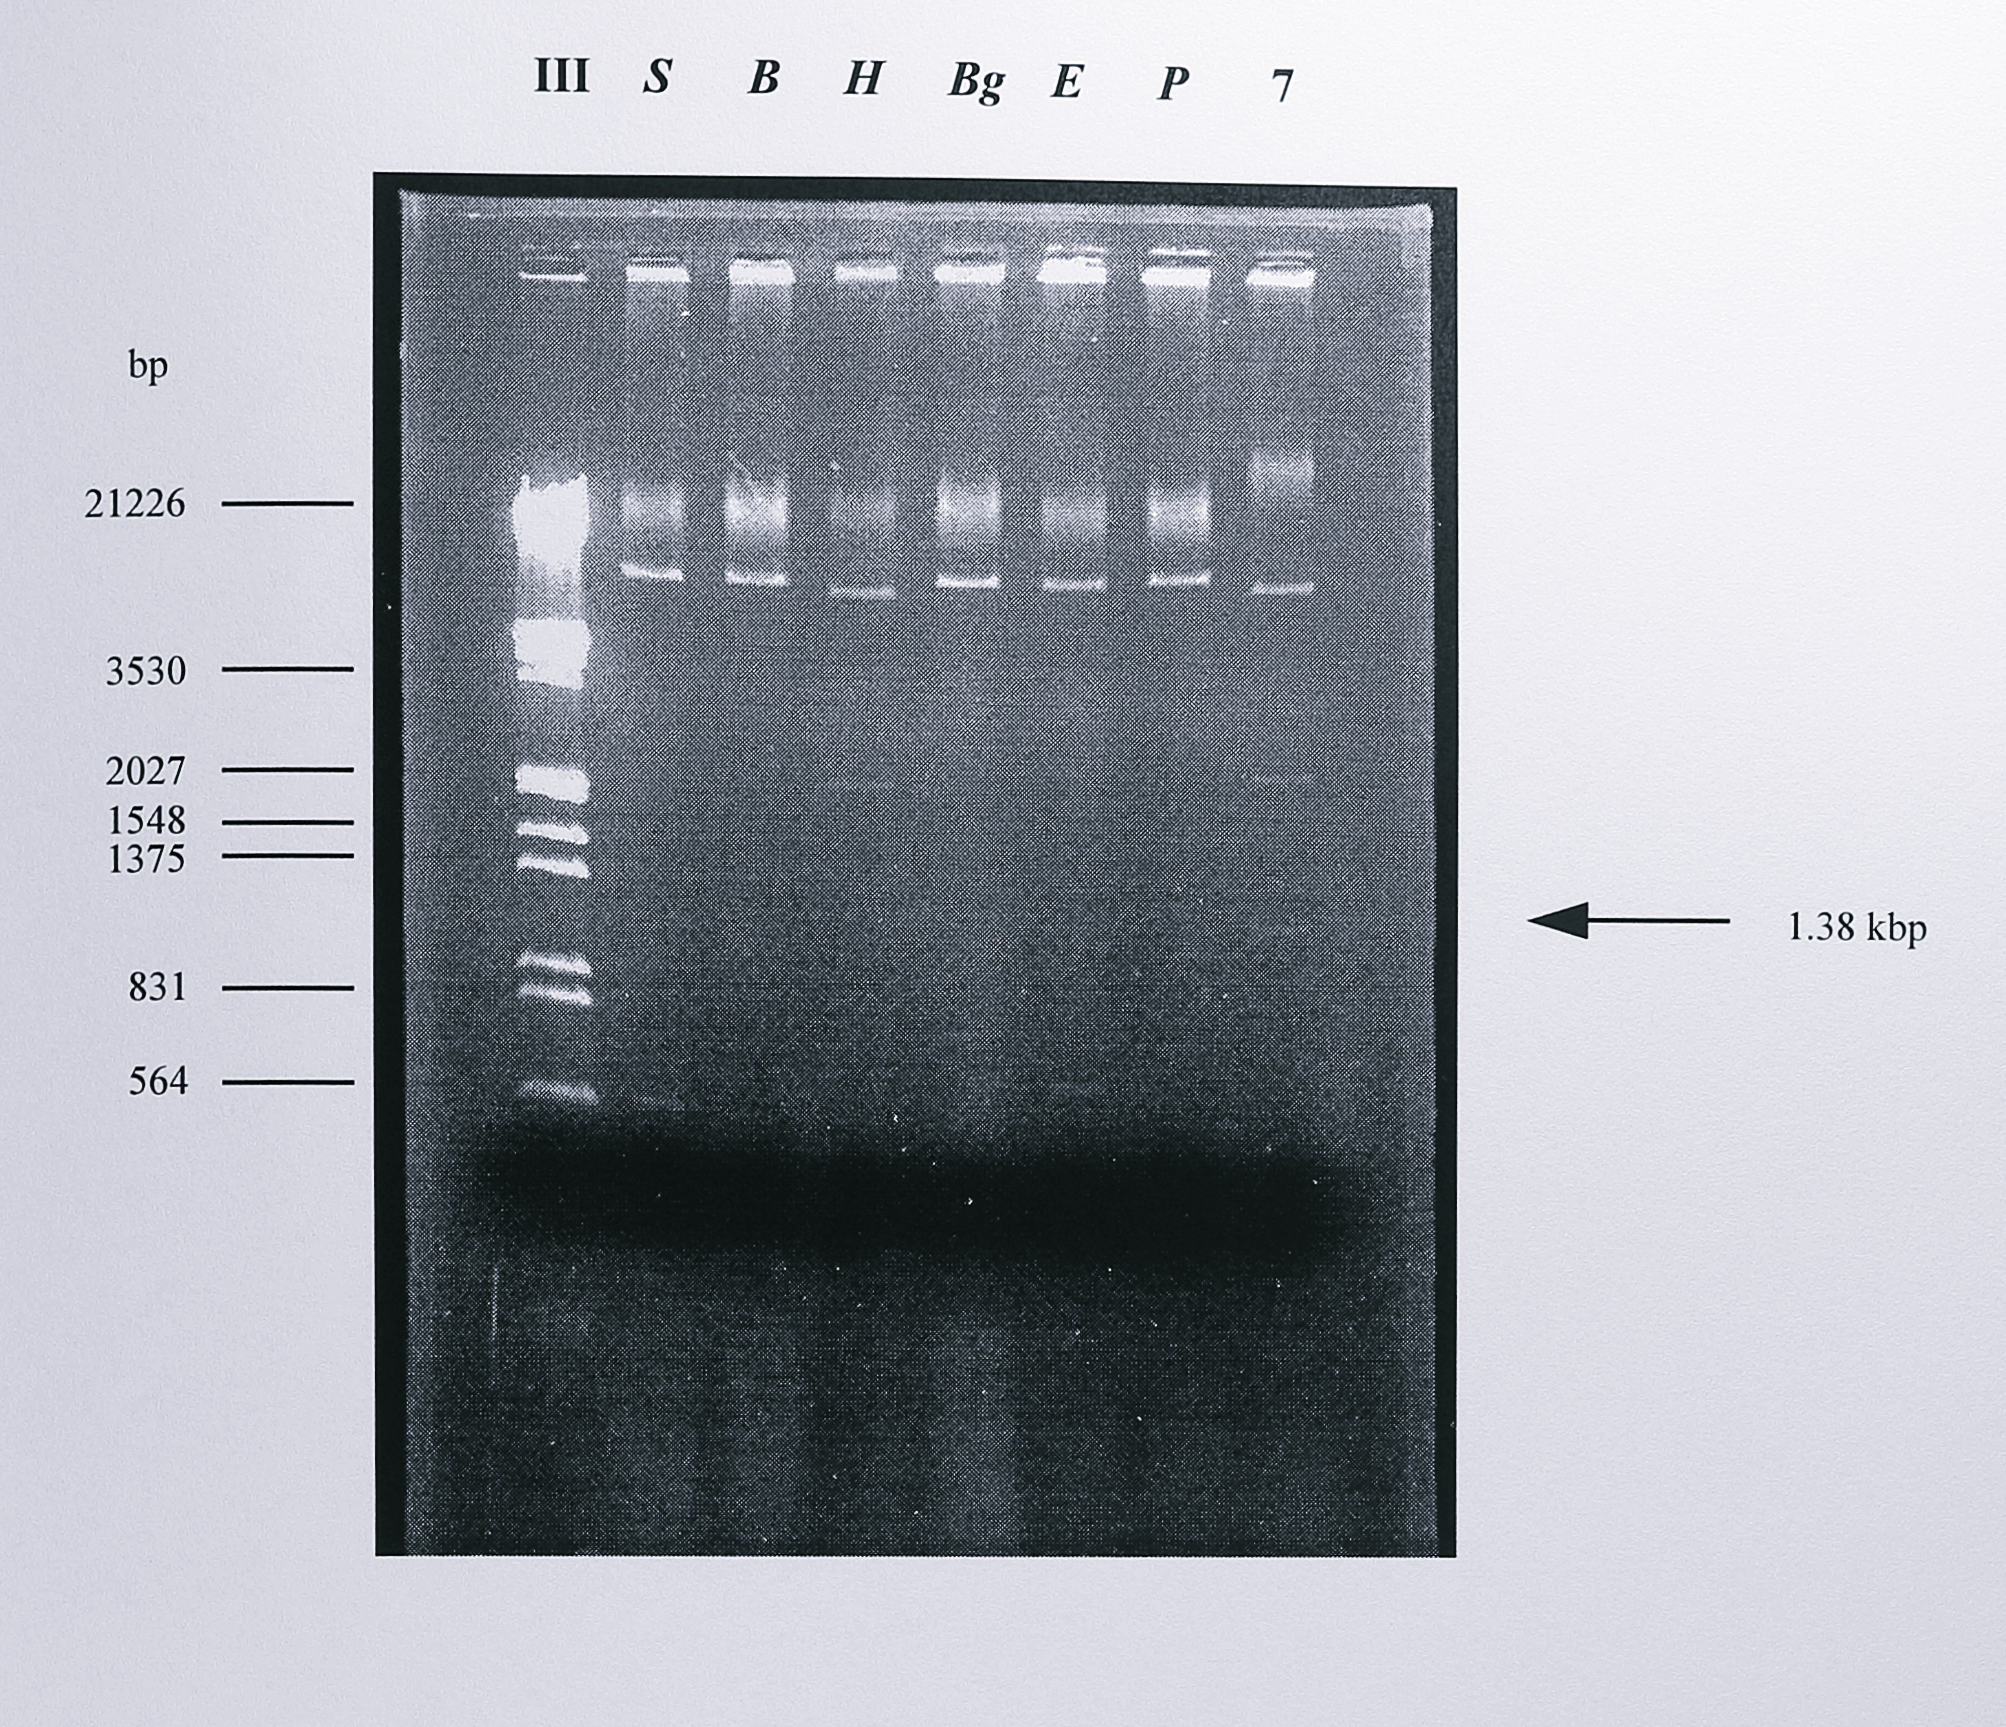 Restriction digest analysis of the plasmids pMMBSE and pMMBSEK. Digests of pMMBSE were performed using _SalI_ (S), _BamHI_ (B), _HindIII_ (H), _BglII_ (Bg), _EcoRI_ (E) and _PstI_ (P) and the fragments were separated by electrophoresis on a 0.8% agarose gel. The fragments shown above are of the expected sizes from the 2.4 kbp fragment of pBNIR, containing the _nirS_ gene, in pMMB67EH. Lane 7 contains a _HindIII_ digest of the plasmid pMMBSEK. This clearly shows an extra fragment of 1.38 kbp from pMMBSEK, which arises due to an extra _HindIII_ site in the centre of the kanamycin cassette. The lane labelled III contains DNA size markers, the sizes of some of which are indicated at the left of the gel.